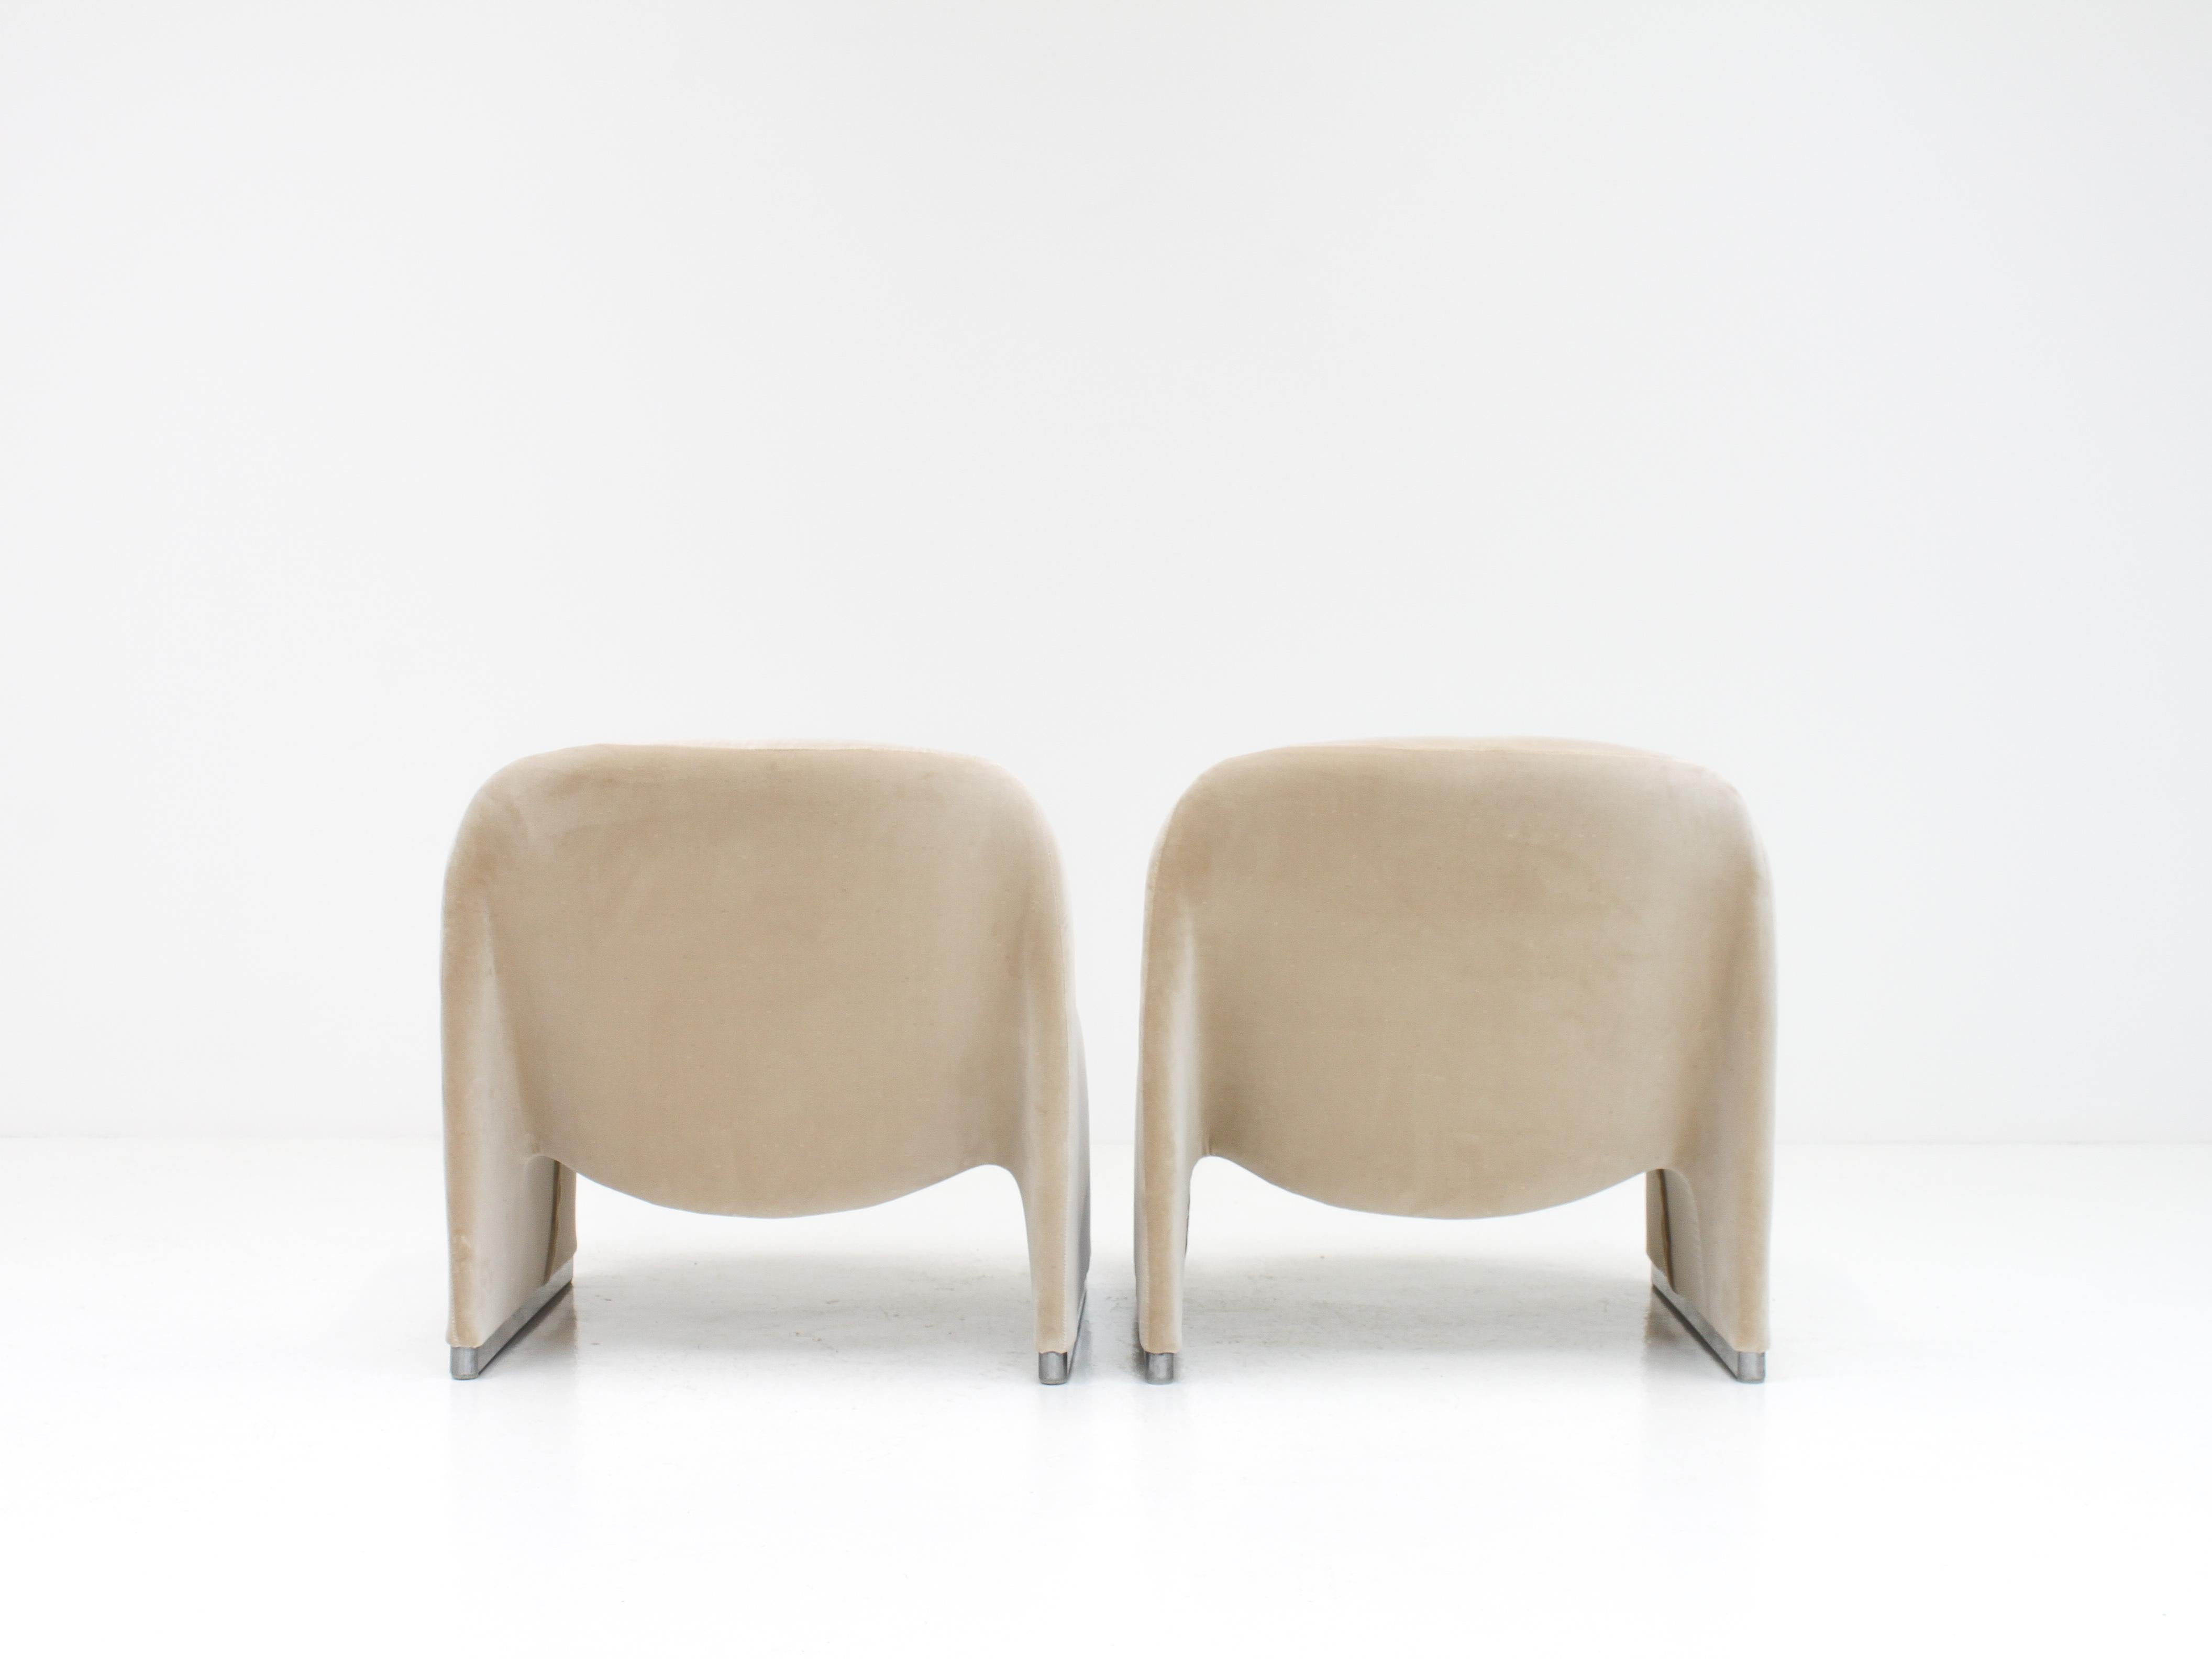 Giancarlo Piretti “Alky” Chairs in New Velvet, Artifort, 1970s - *Customizable* For Sale 3